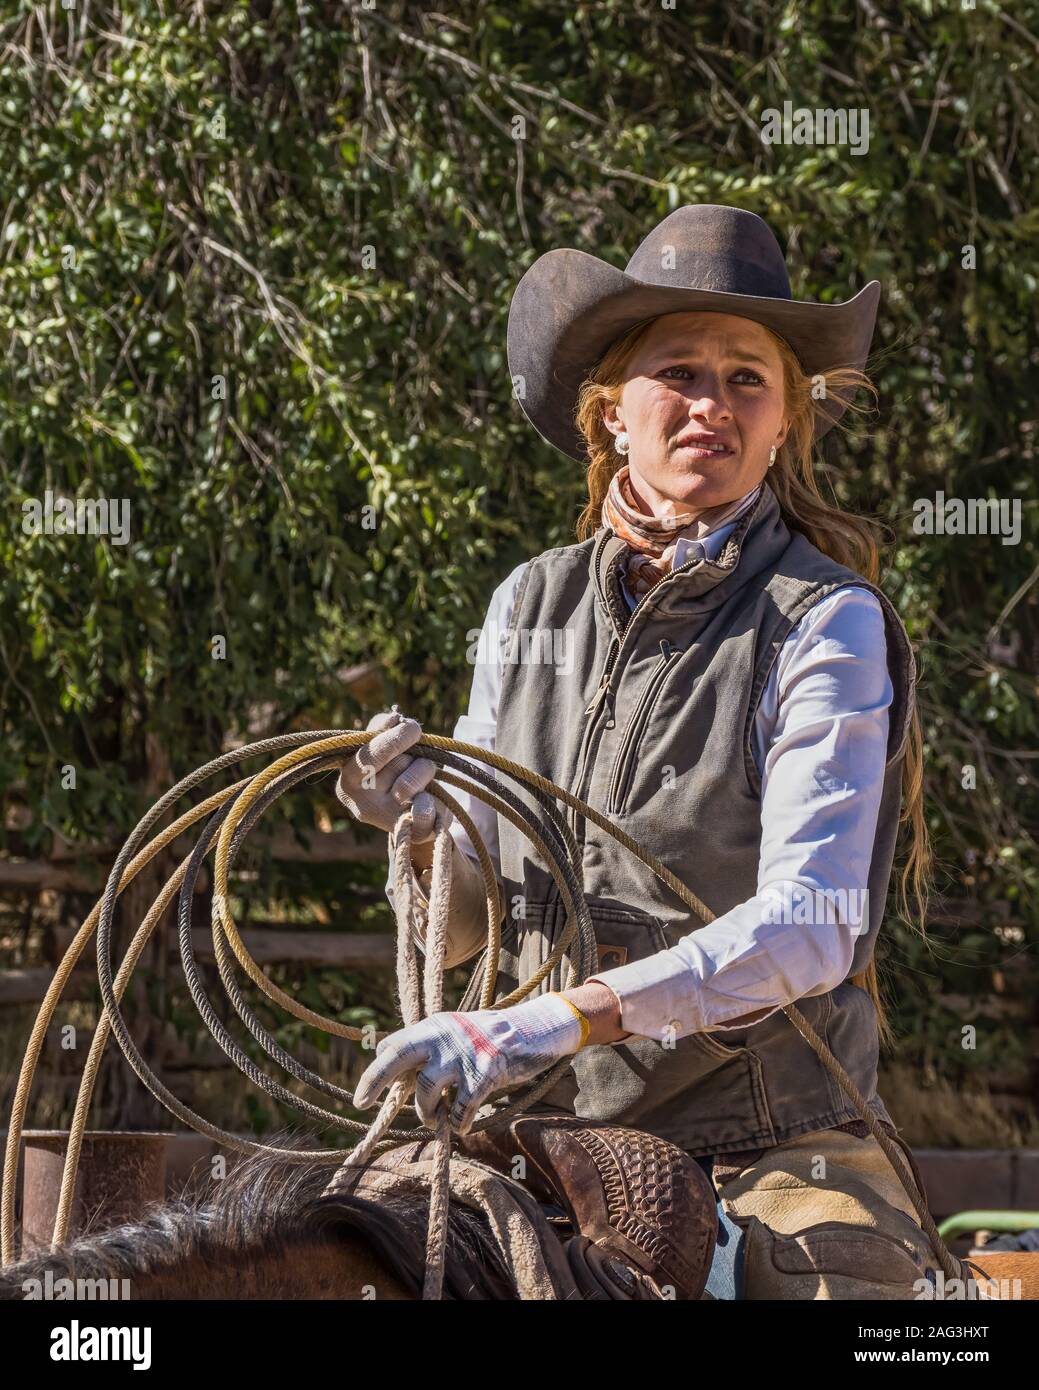 A working cowgirl wrangler prepares her lariat for roping calves in a corral on a ranch near Moab, Utah. Stock Photo